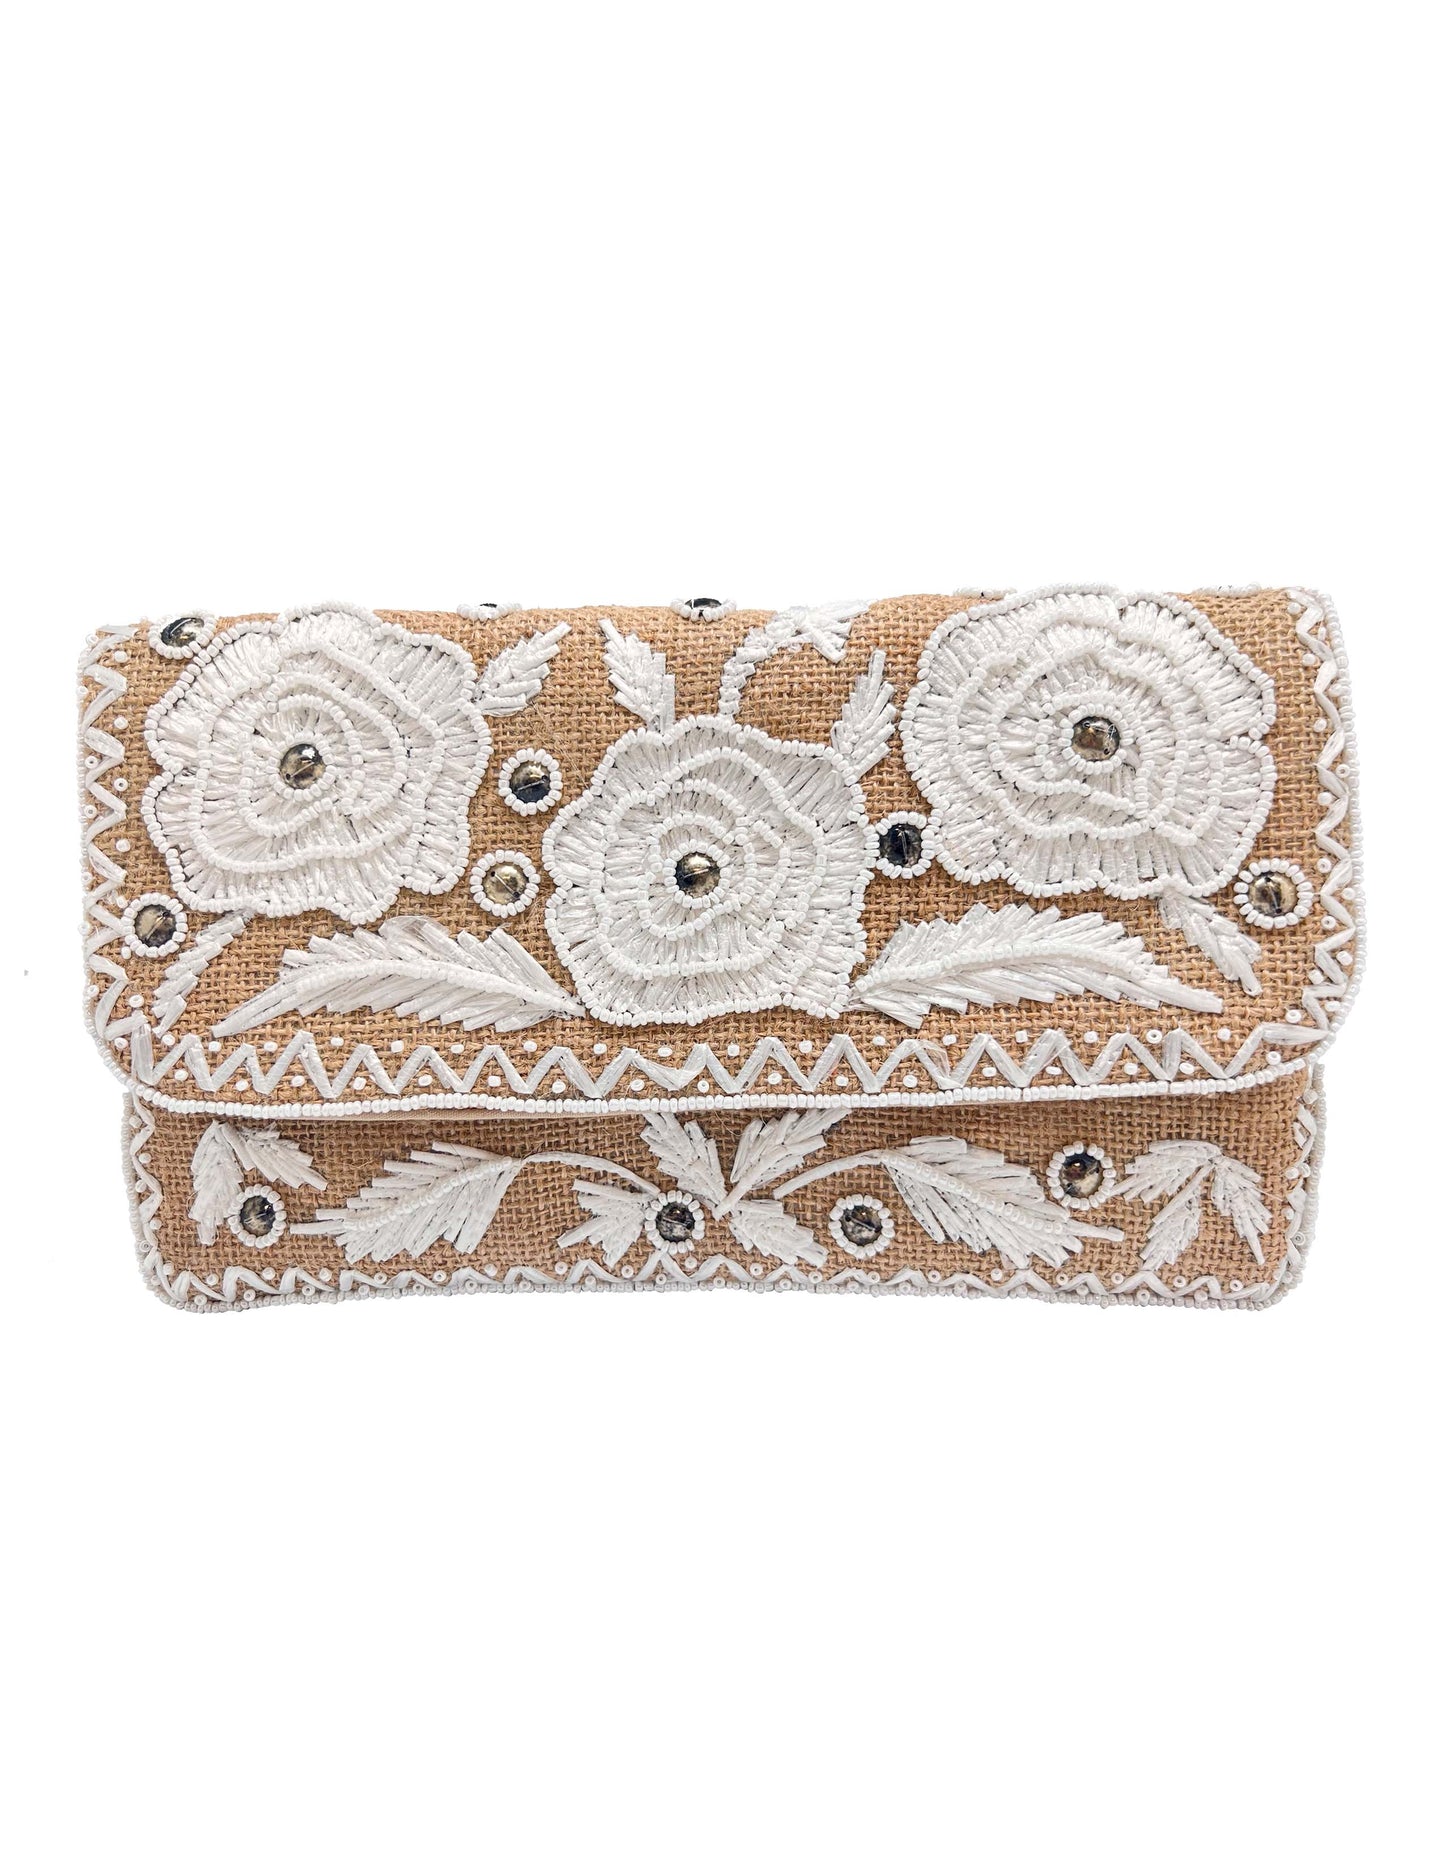 WHITE FLORAL BEADED CLUTCH